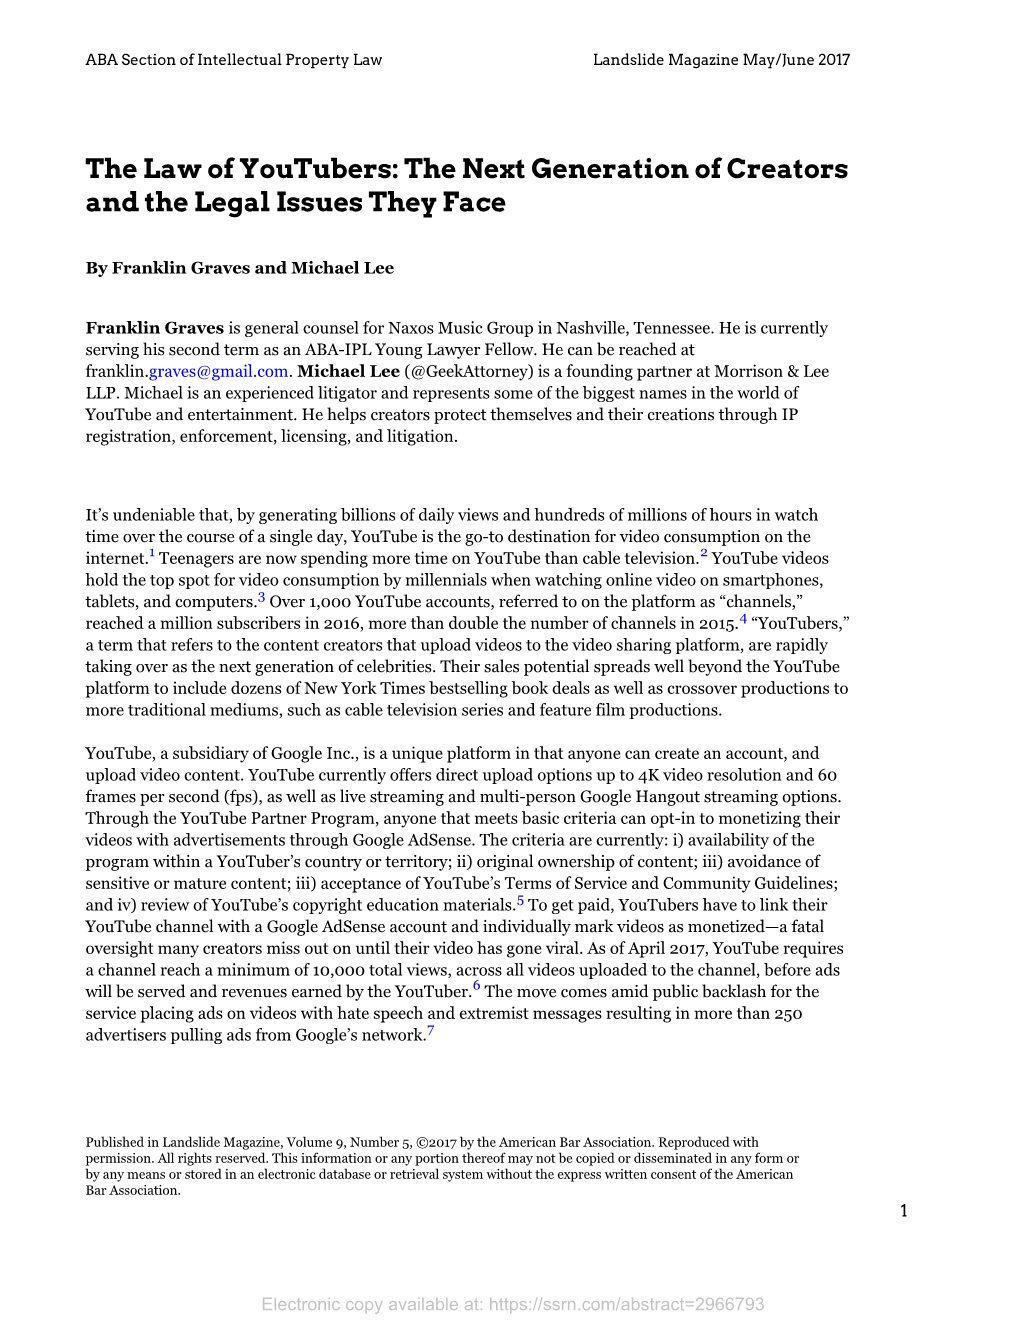 The Law of Youtubers: the Next Generation of Creators and the Legal Issues They Face